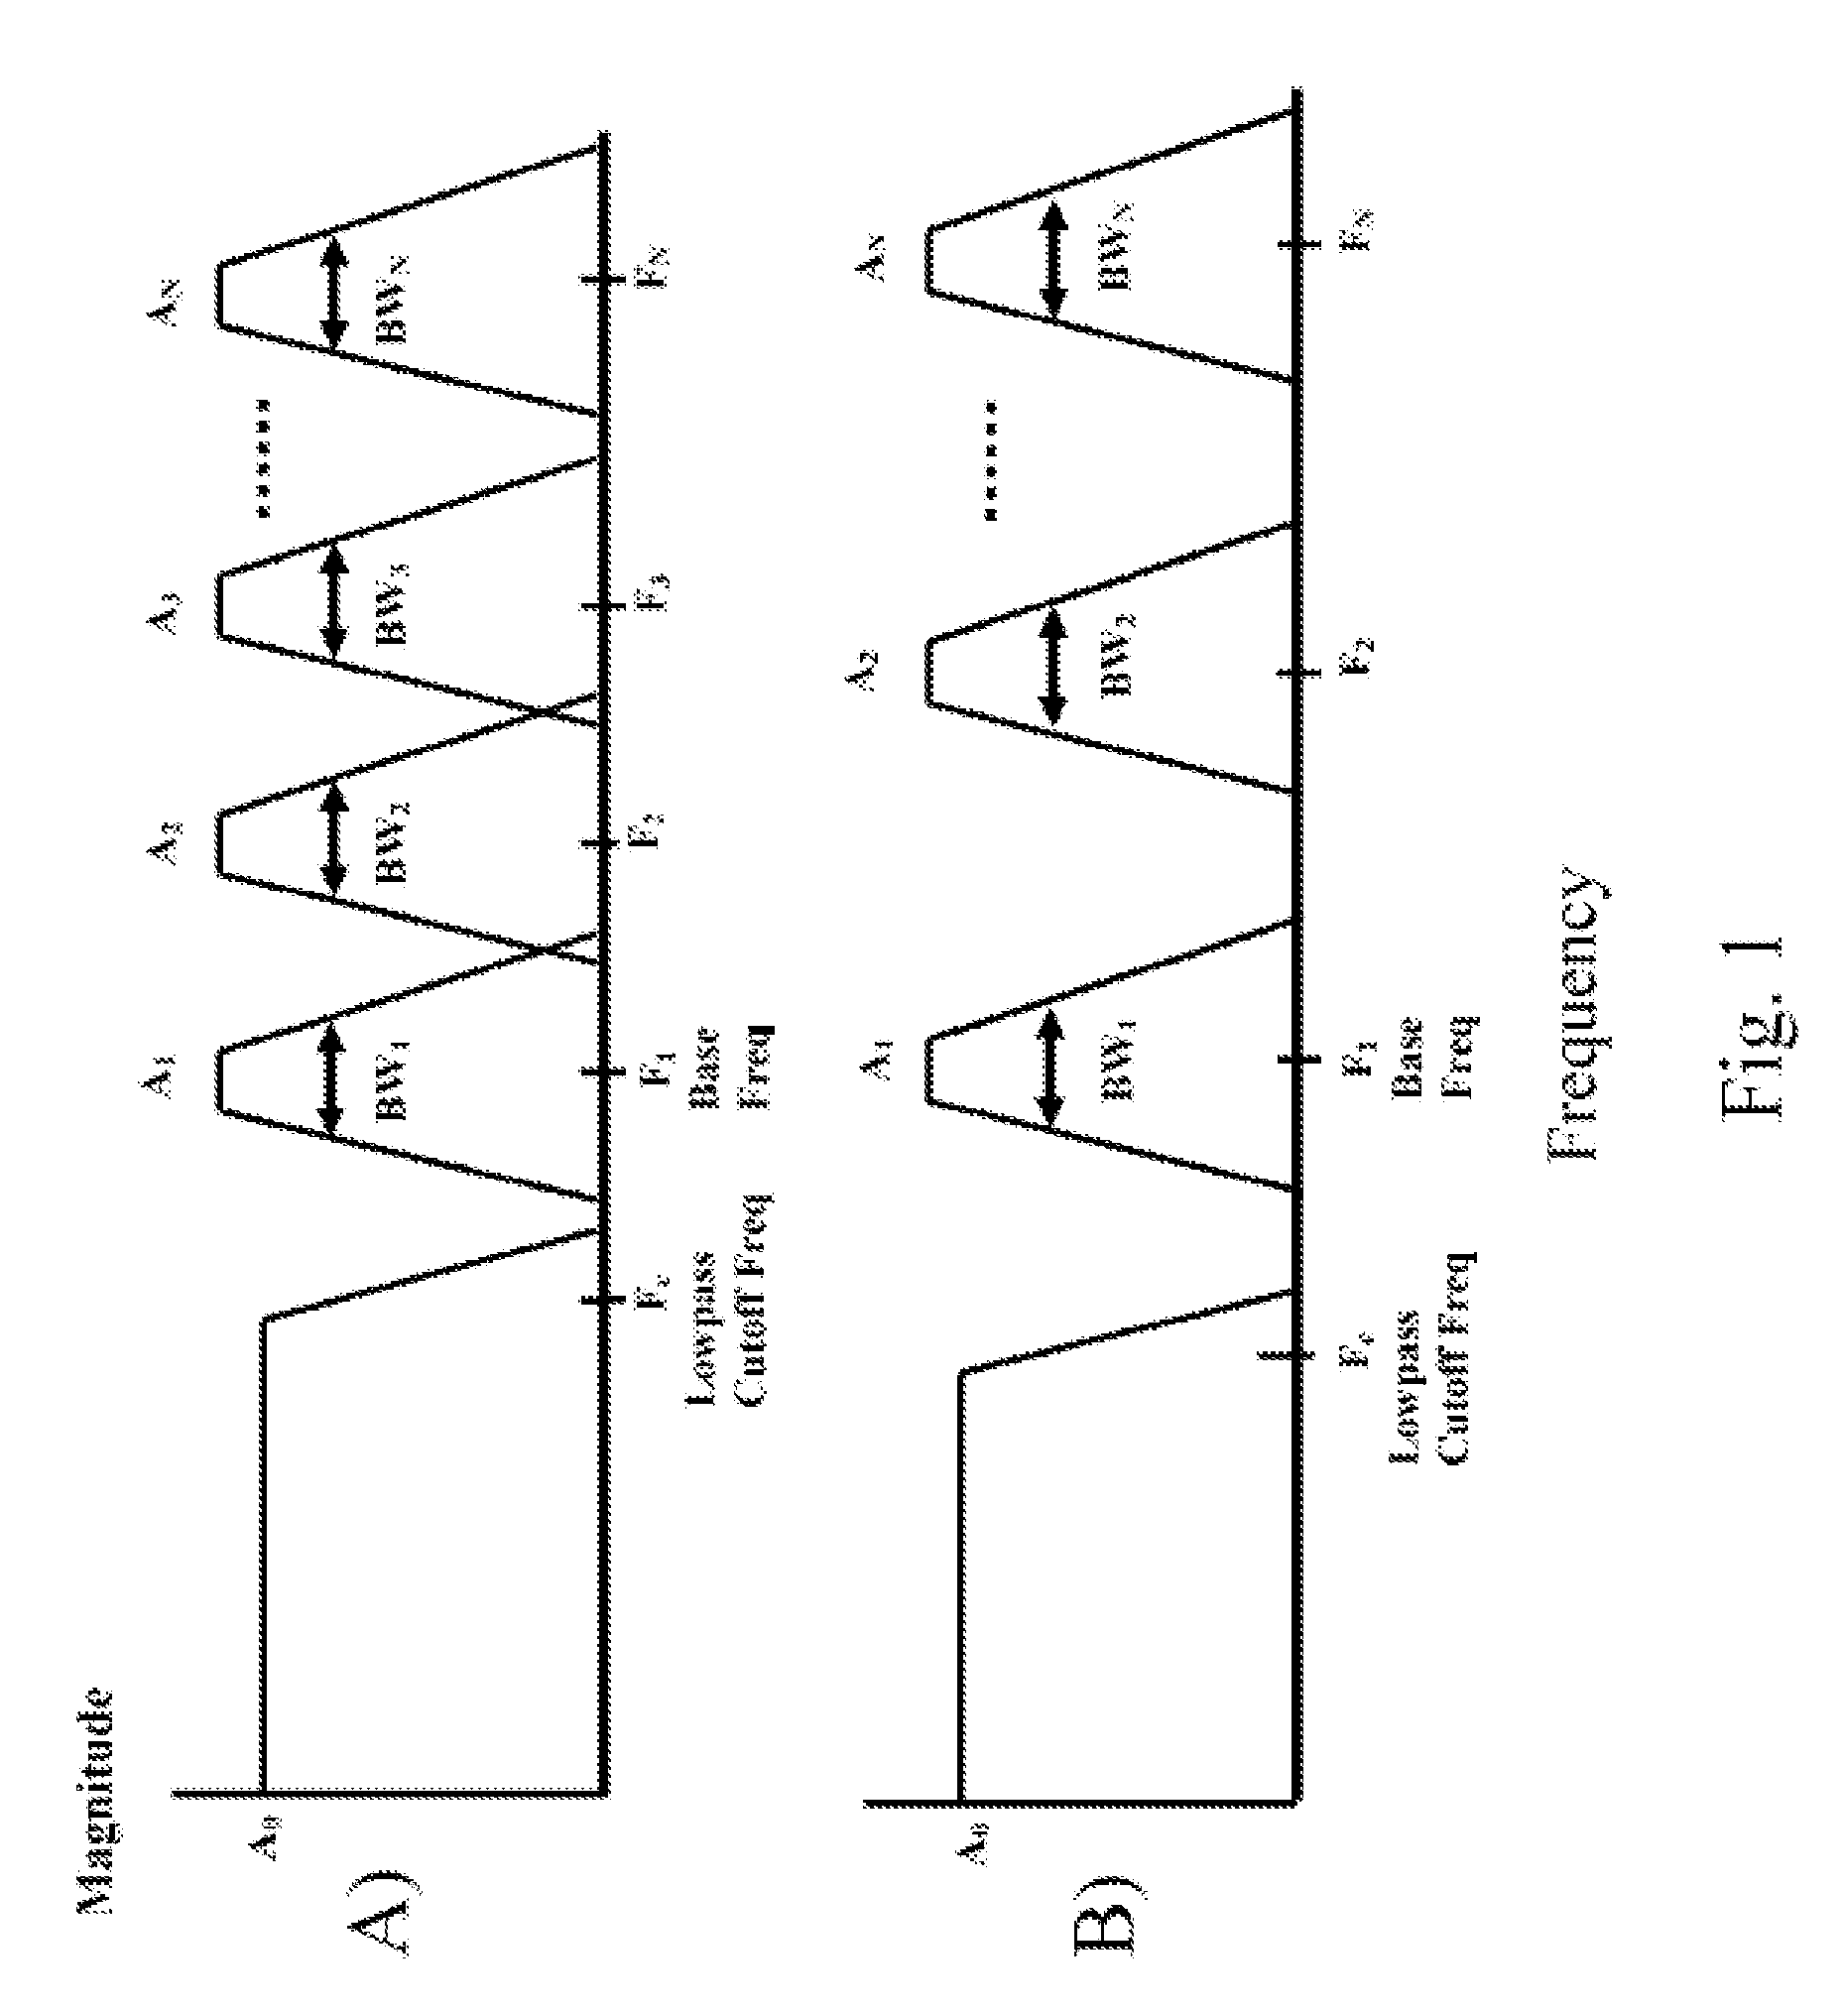 Physiologically-Based Signal Processing System and Method